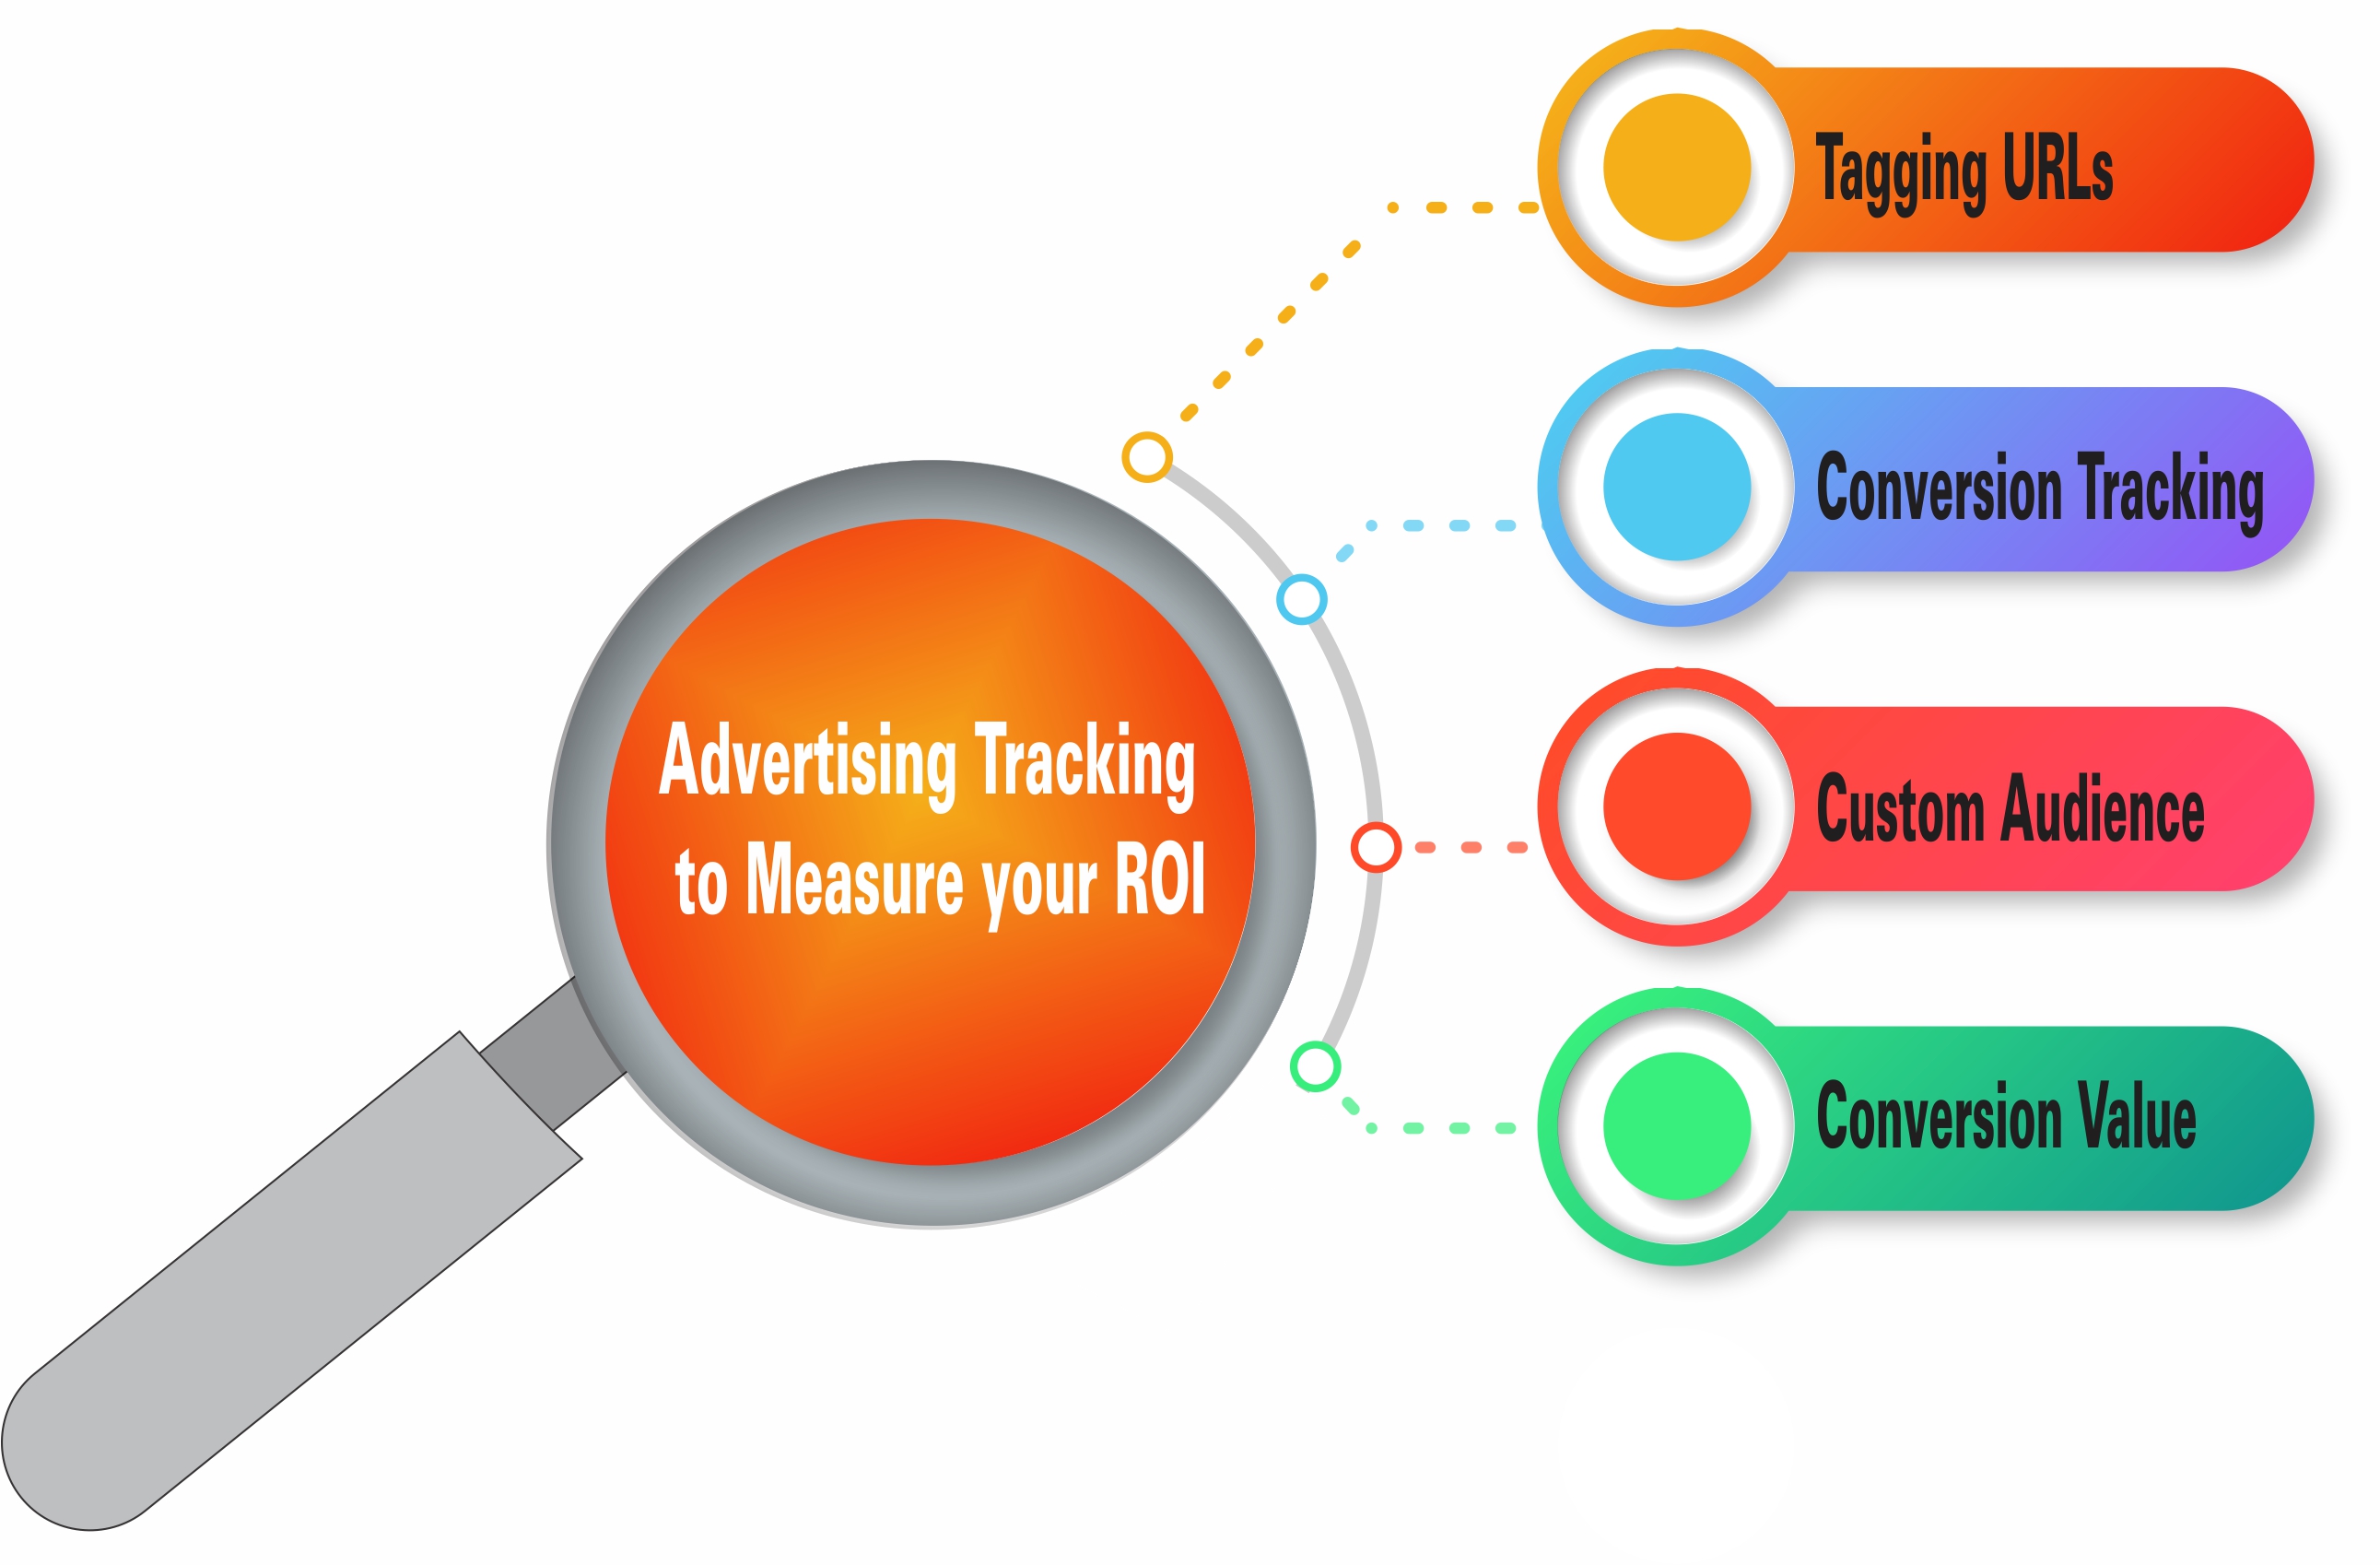 4 Advertising Tracking Techniques to Measure your ROI